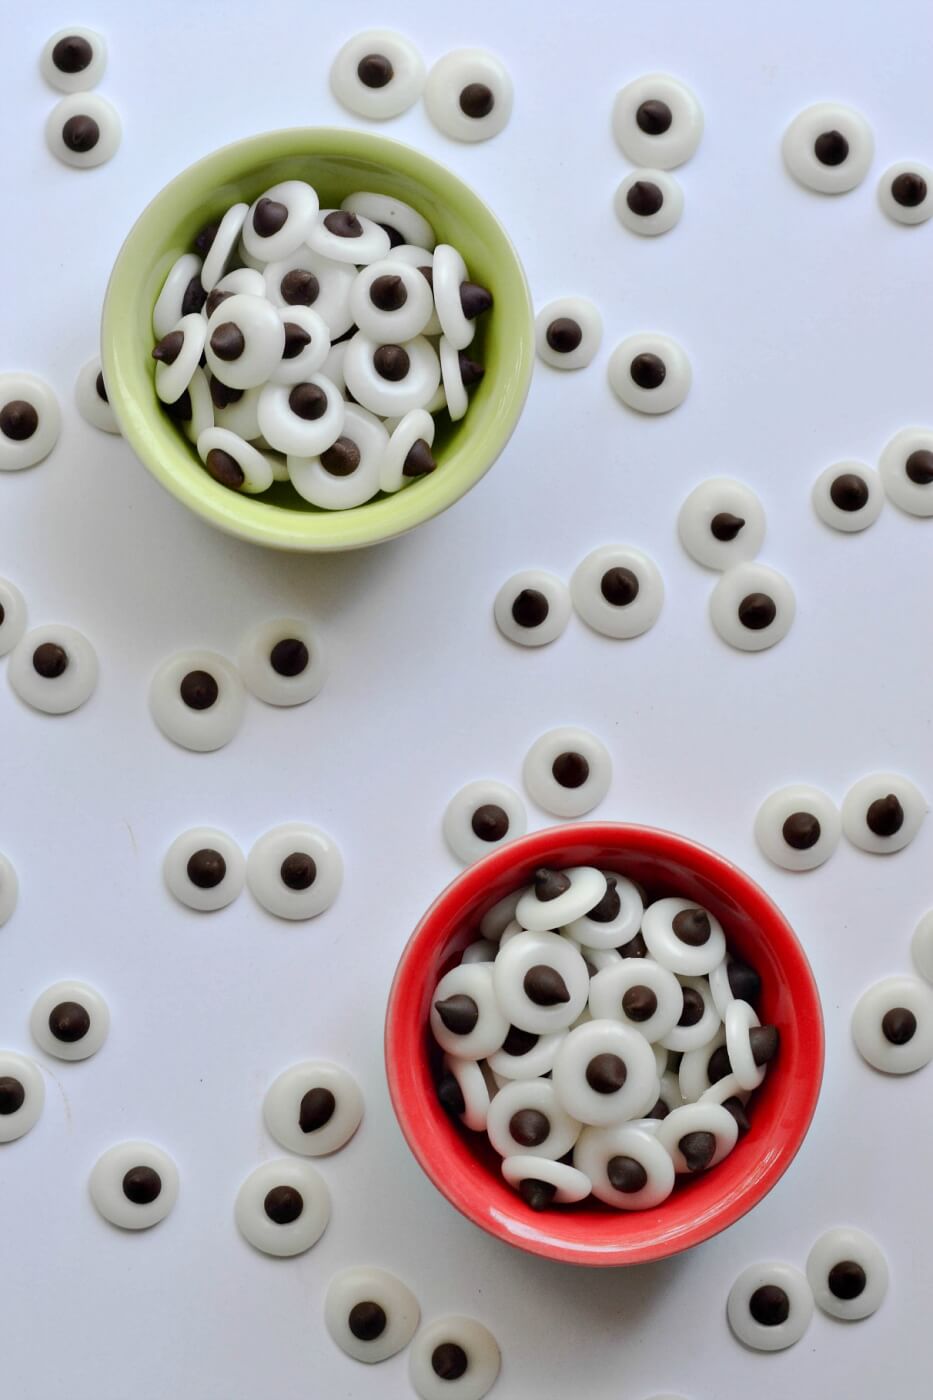 vegan candy googly eyes in a bowl and on a table